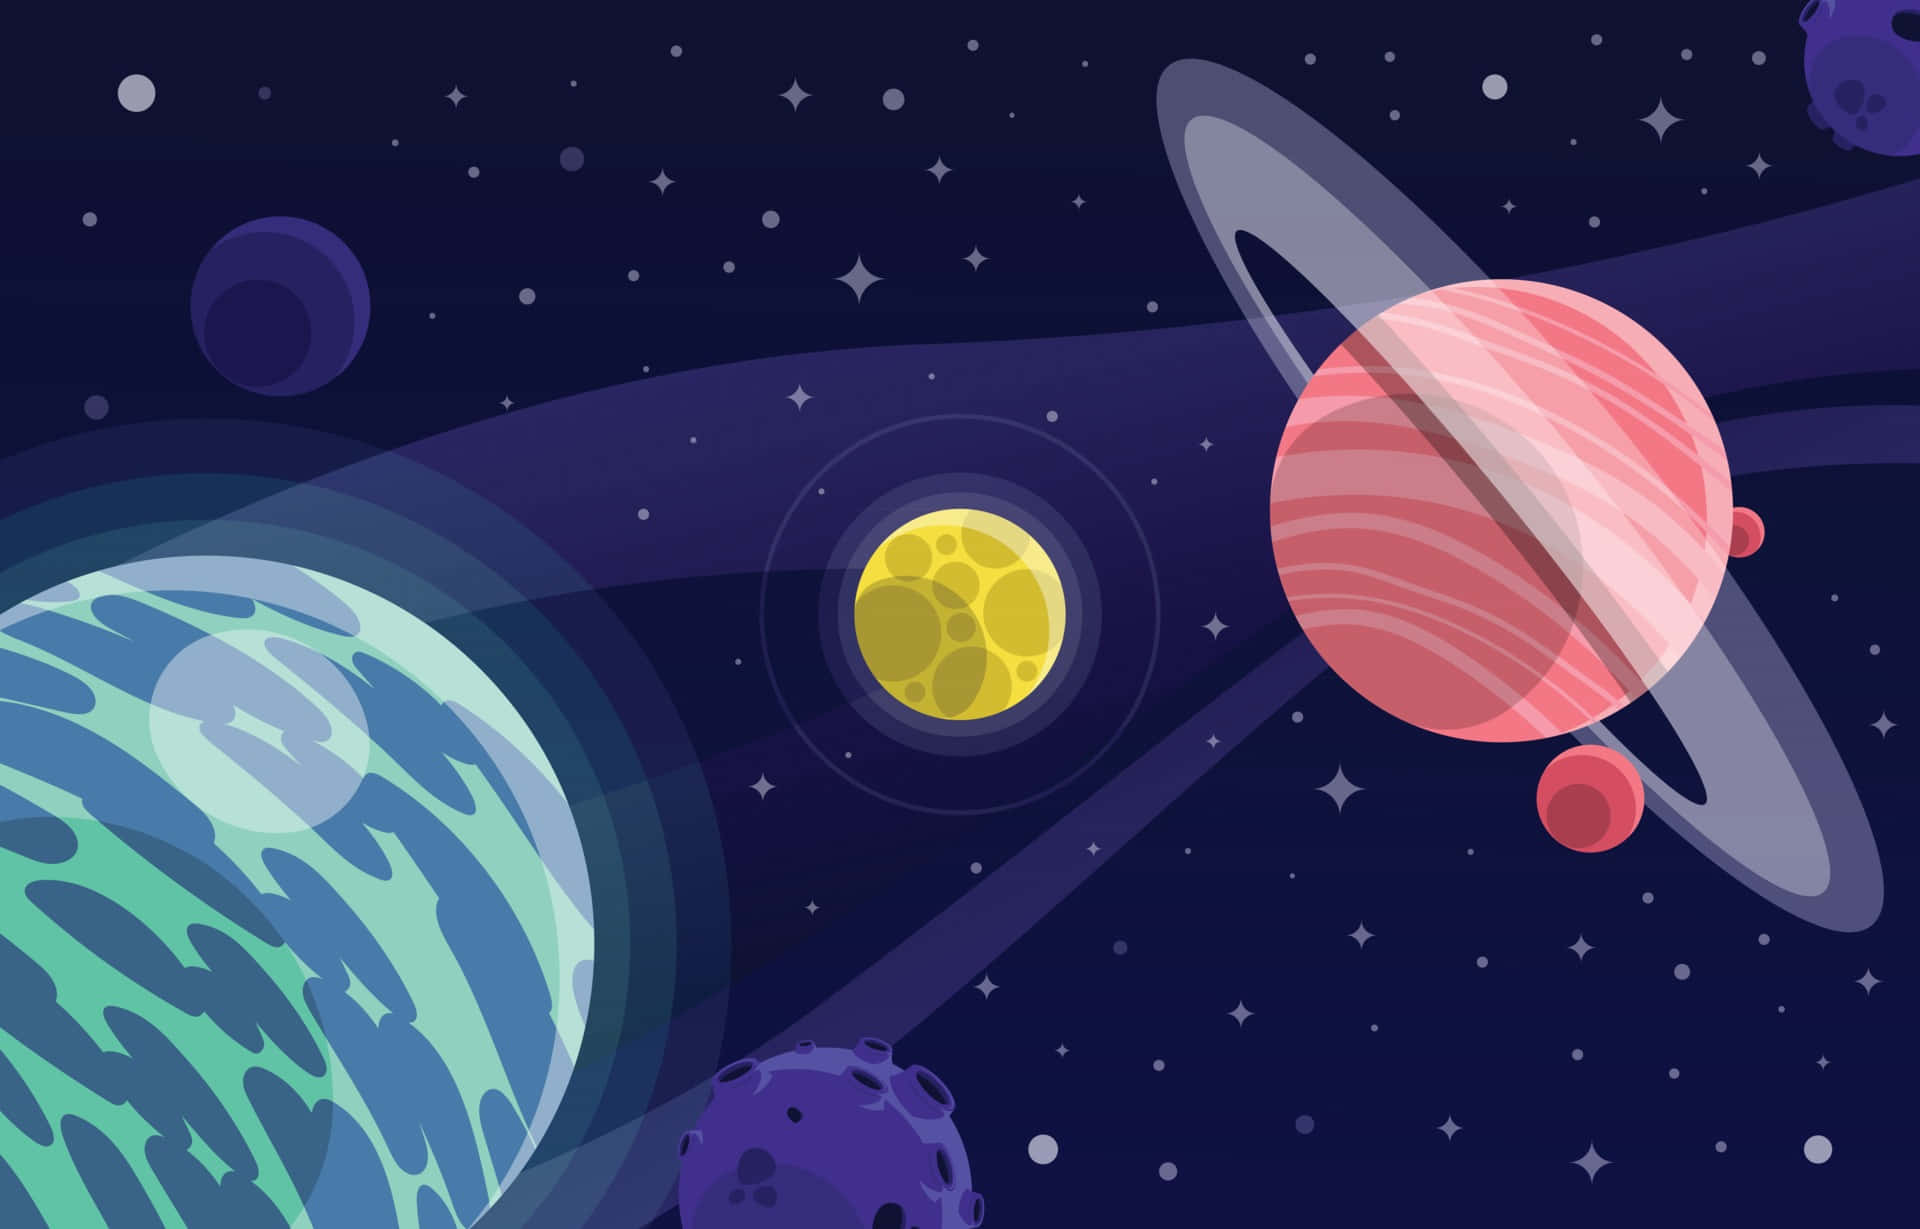 Take a voyage through the planets and galaxies of a magical cartoon space!